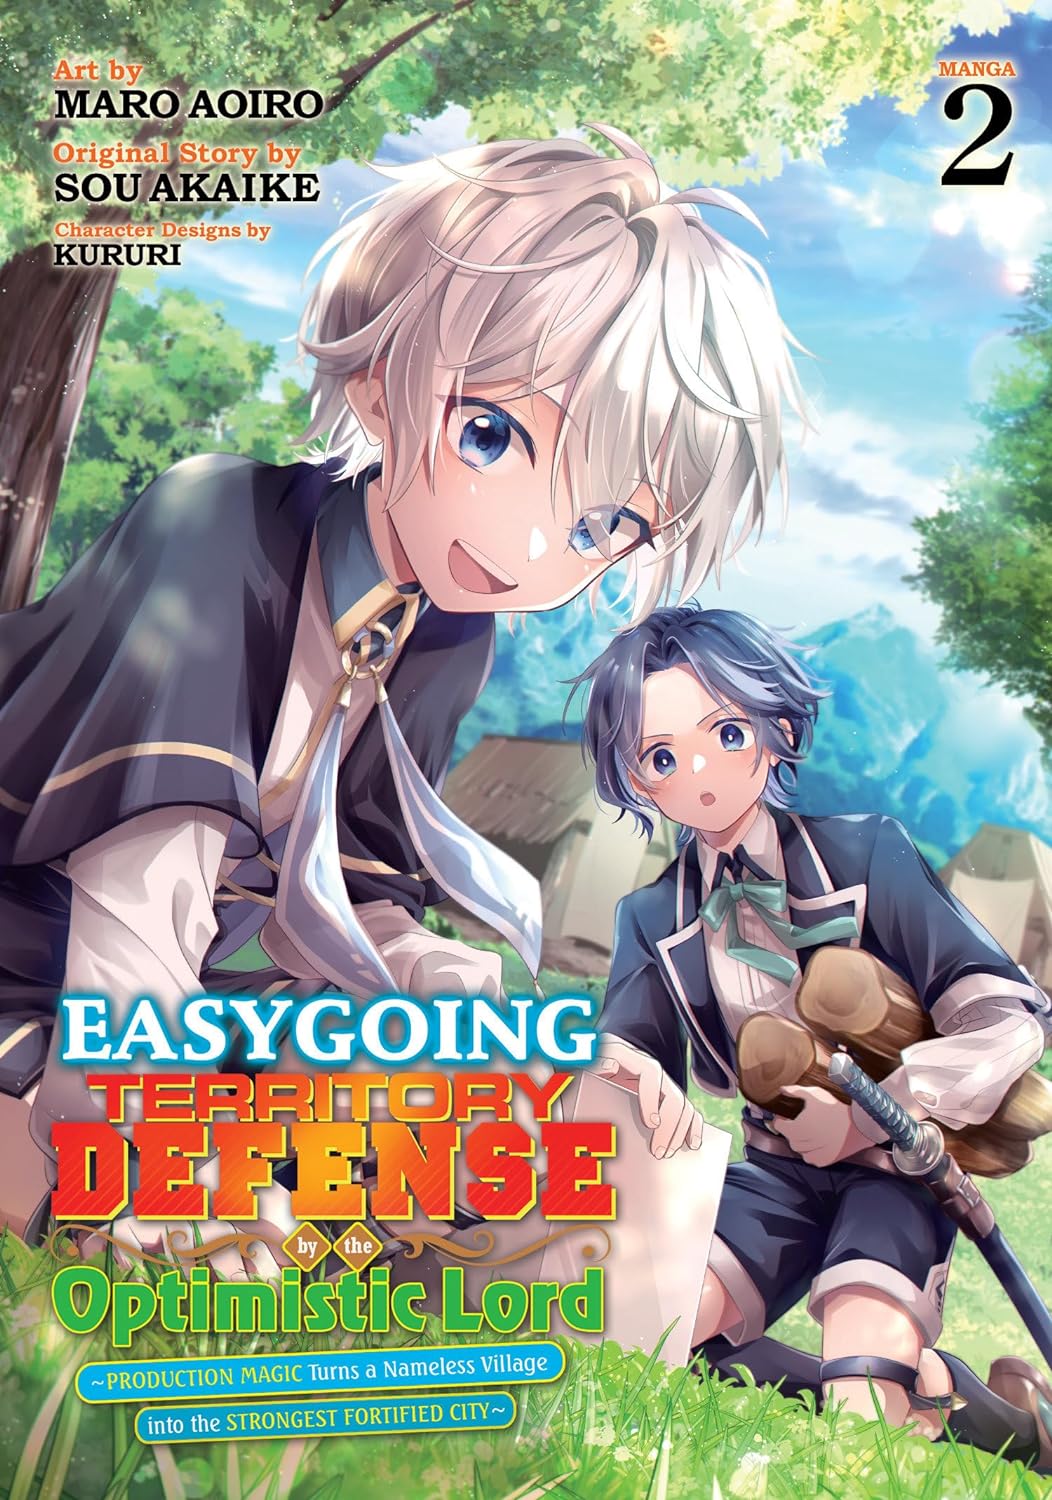 Easygoing Territory Defense by the Optimistic Lord: Production Magic Turns a Nameless Village Into the Strongest Fortified City (Manga) Vol. 02